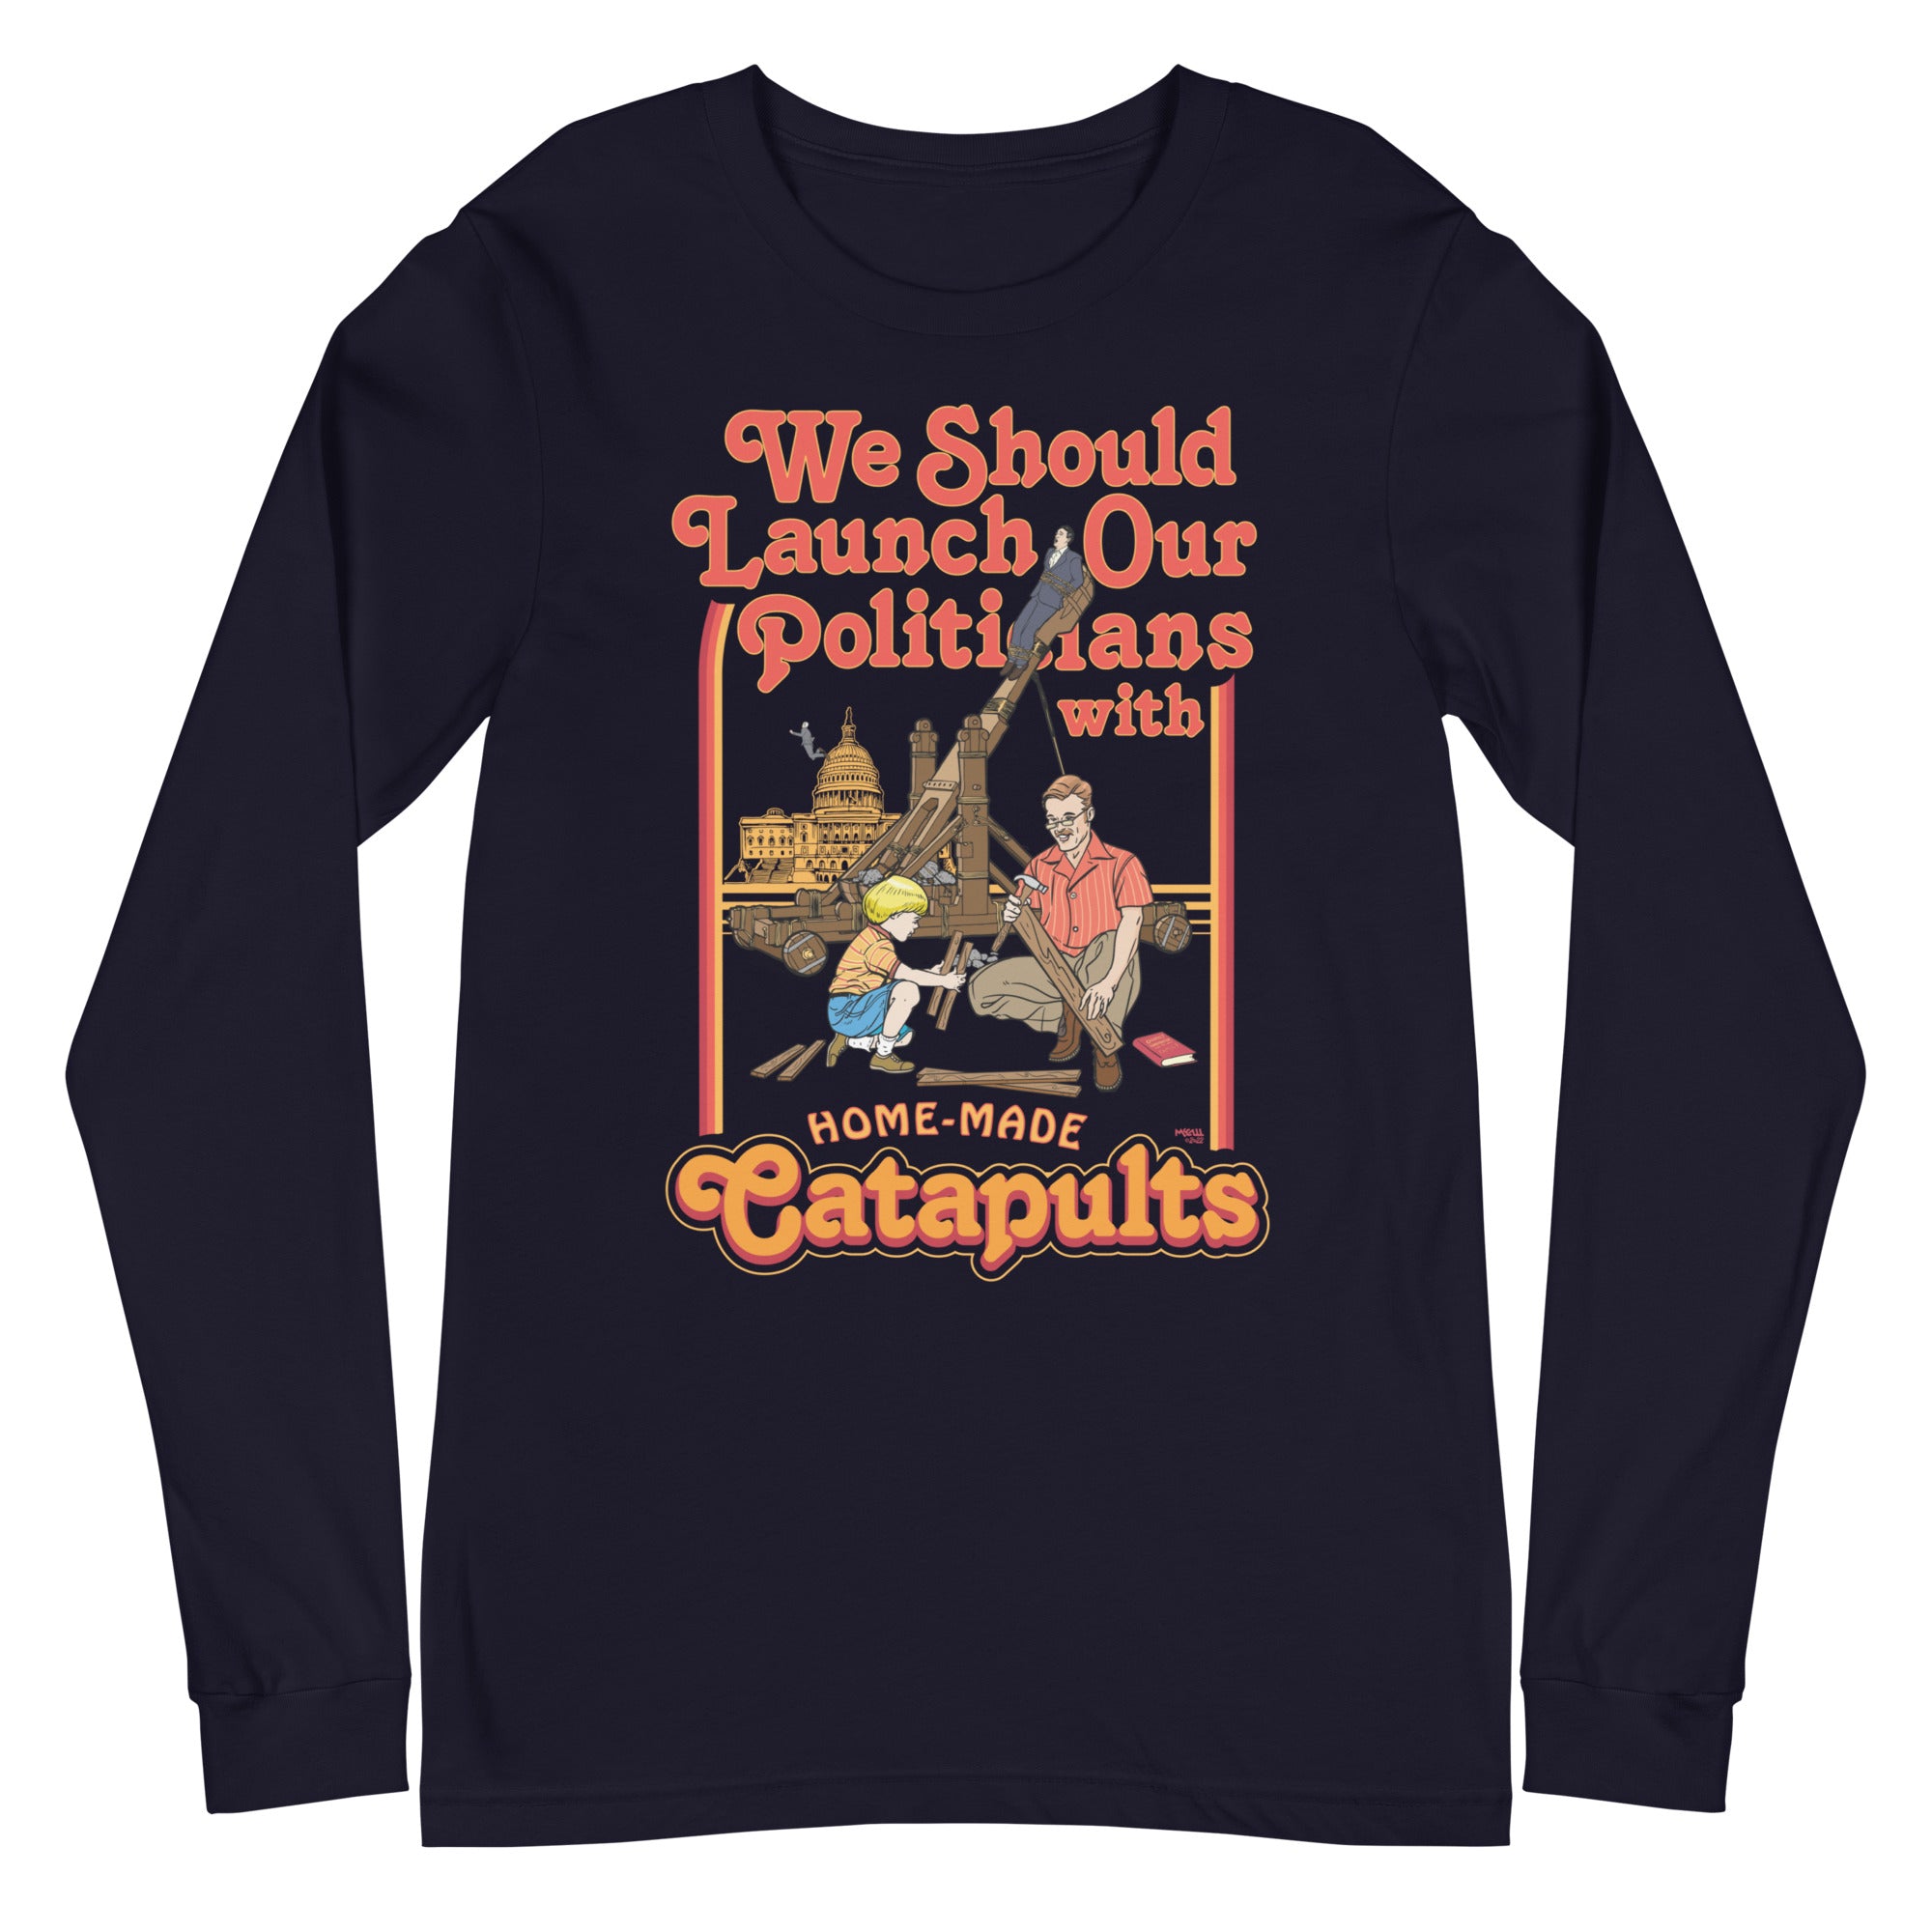 We Should Launch Our Politicians from Catapults Long Sleeve Tee